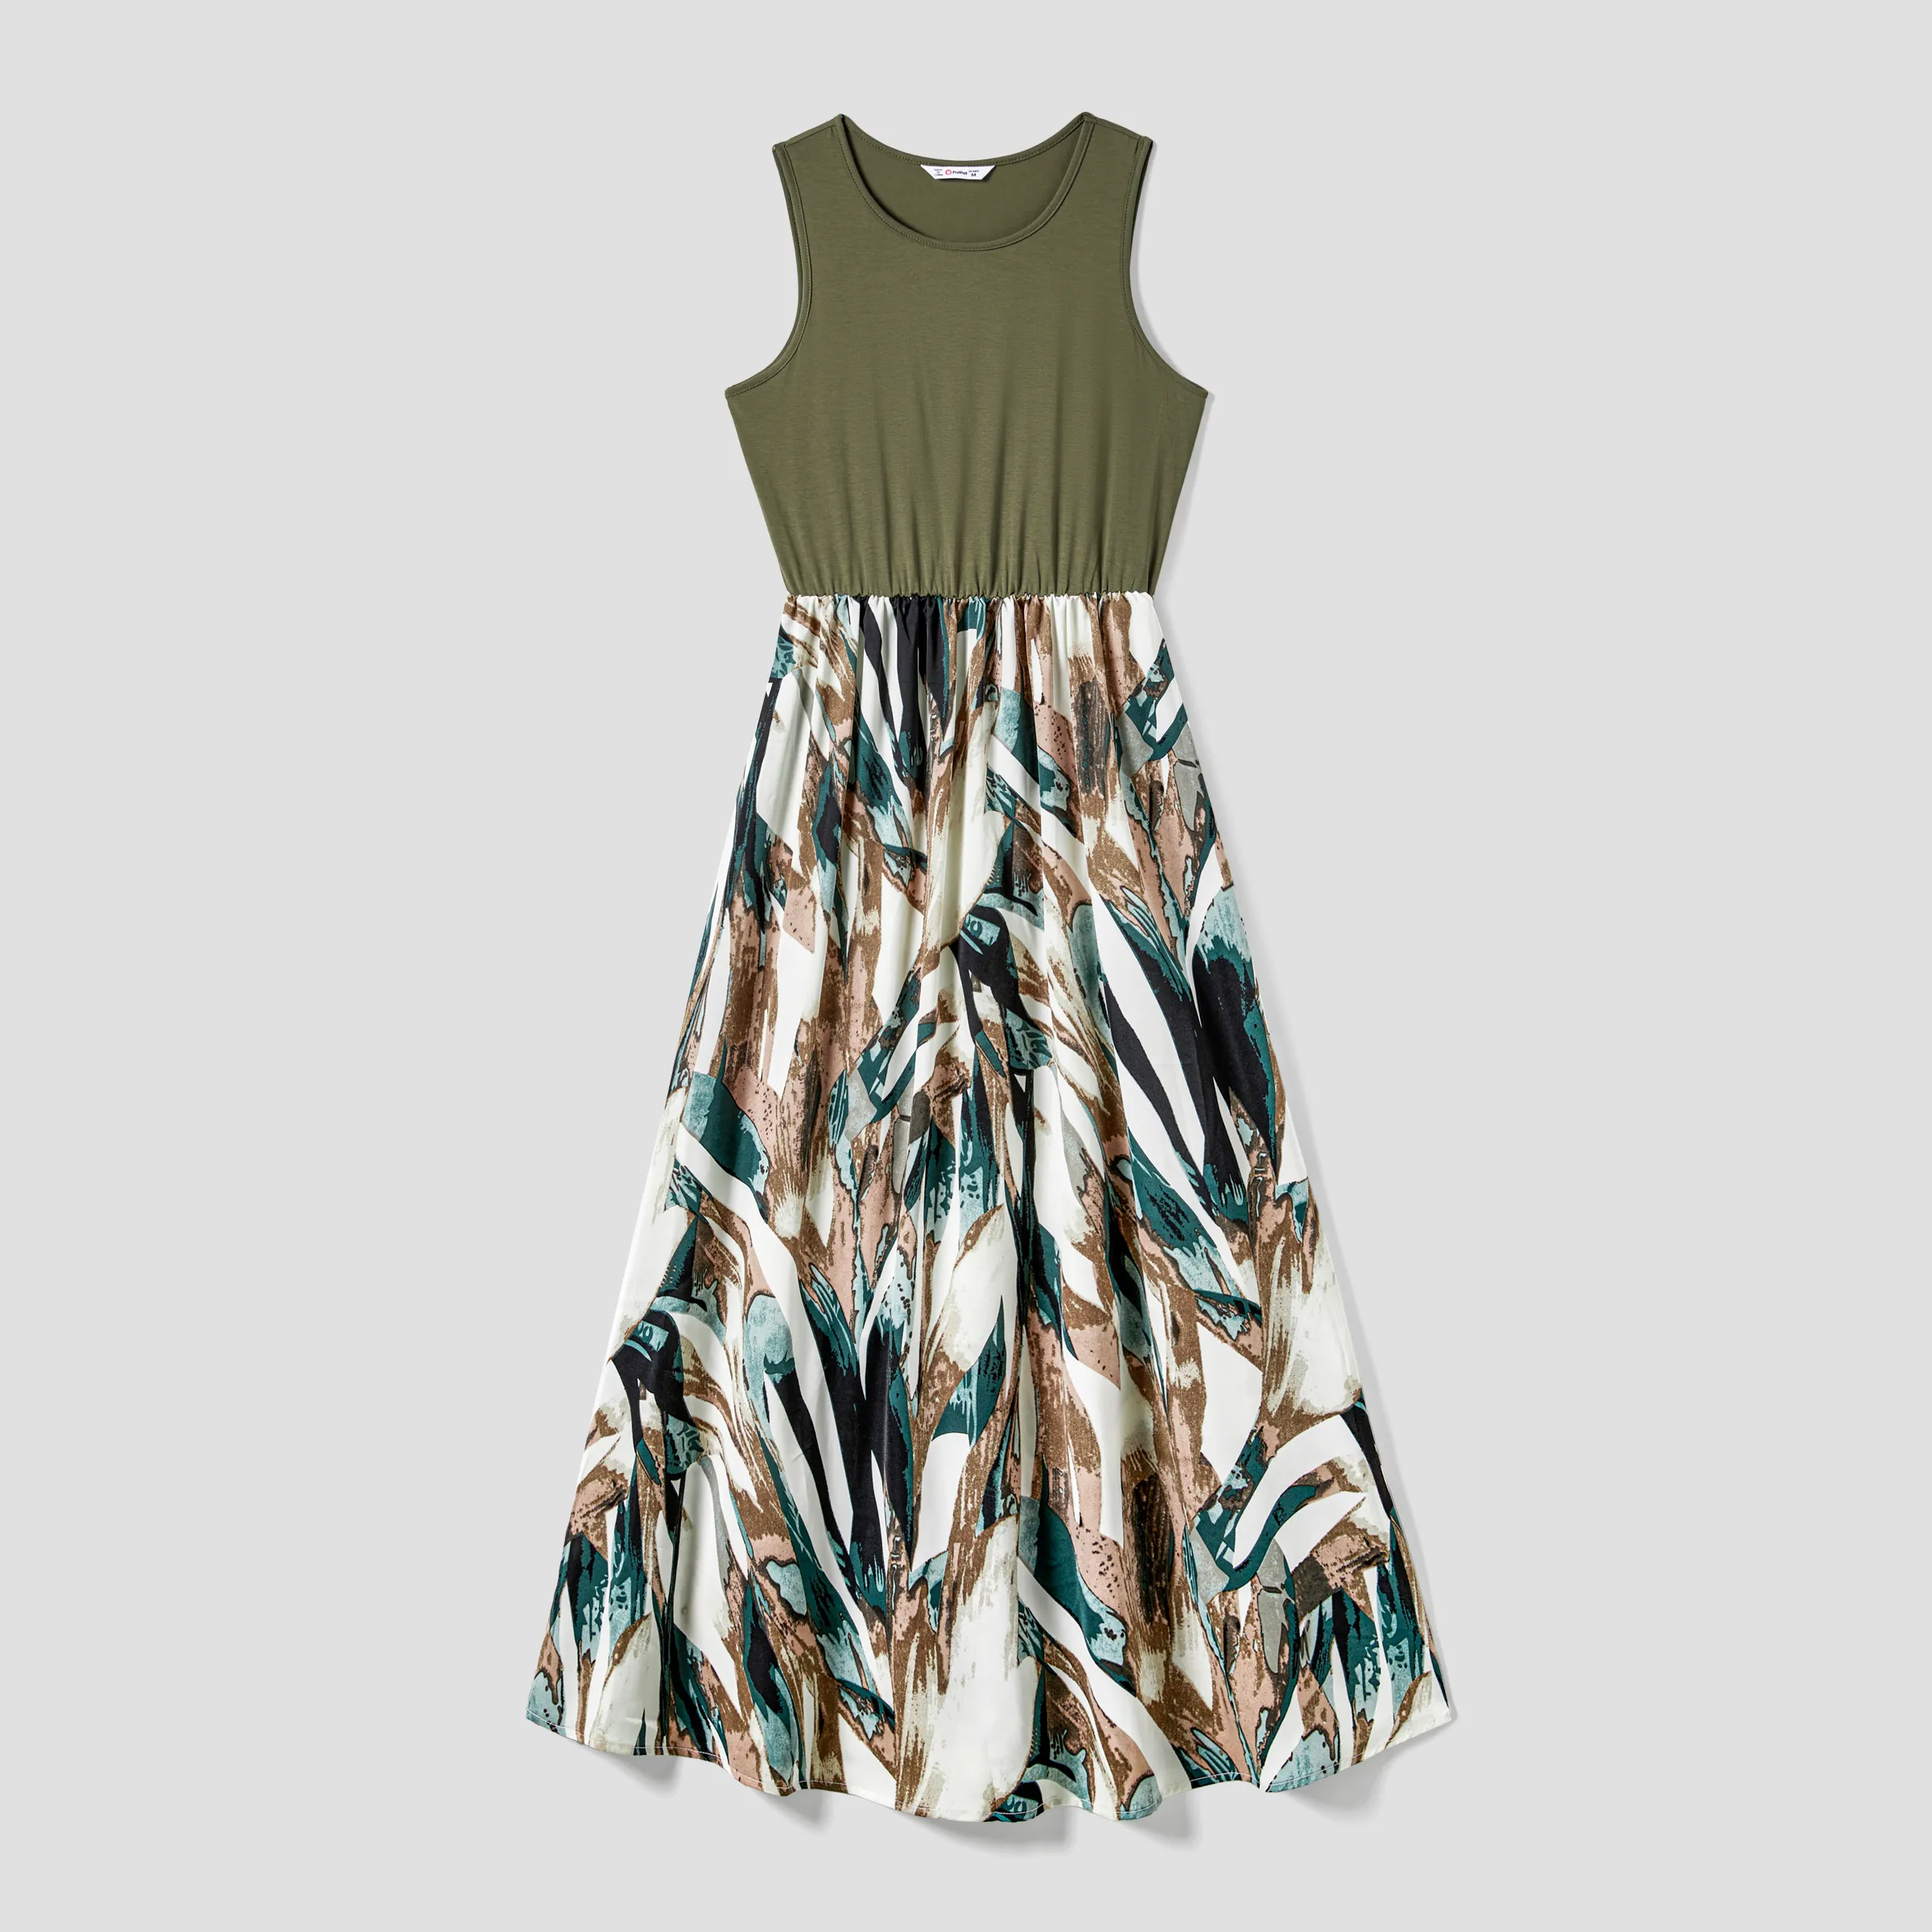 Family Matching Colorblock T-Shirt And Tank Top Spliced Floral A-Line Dress Sets